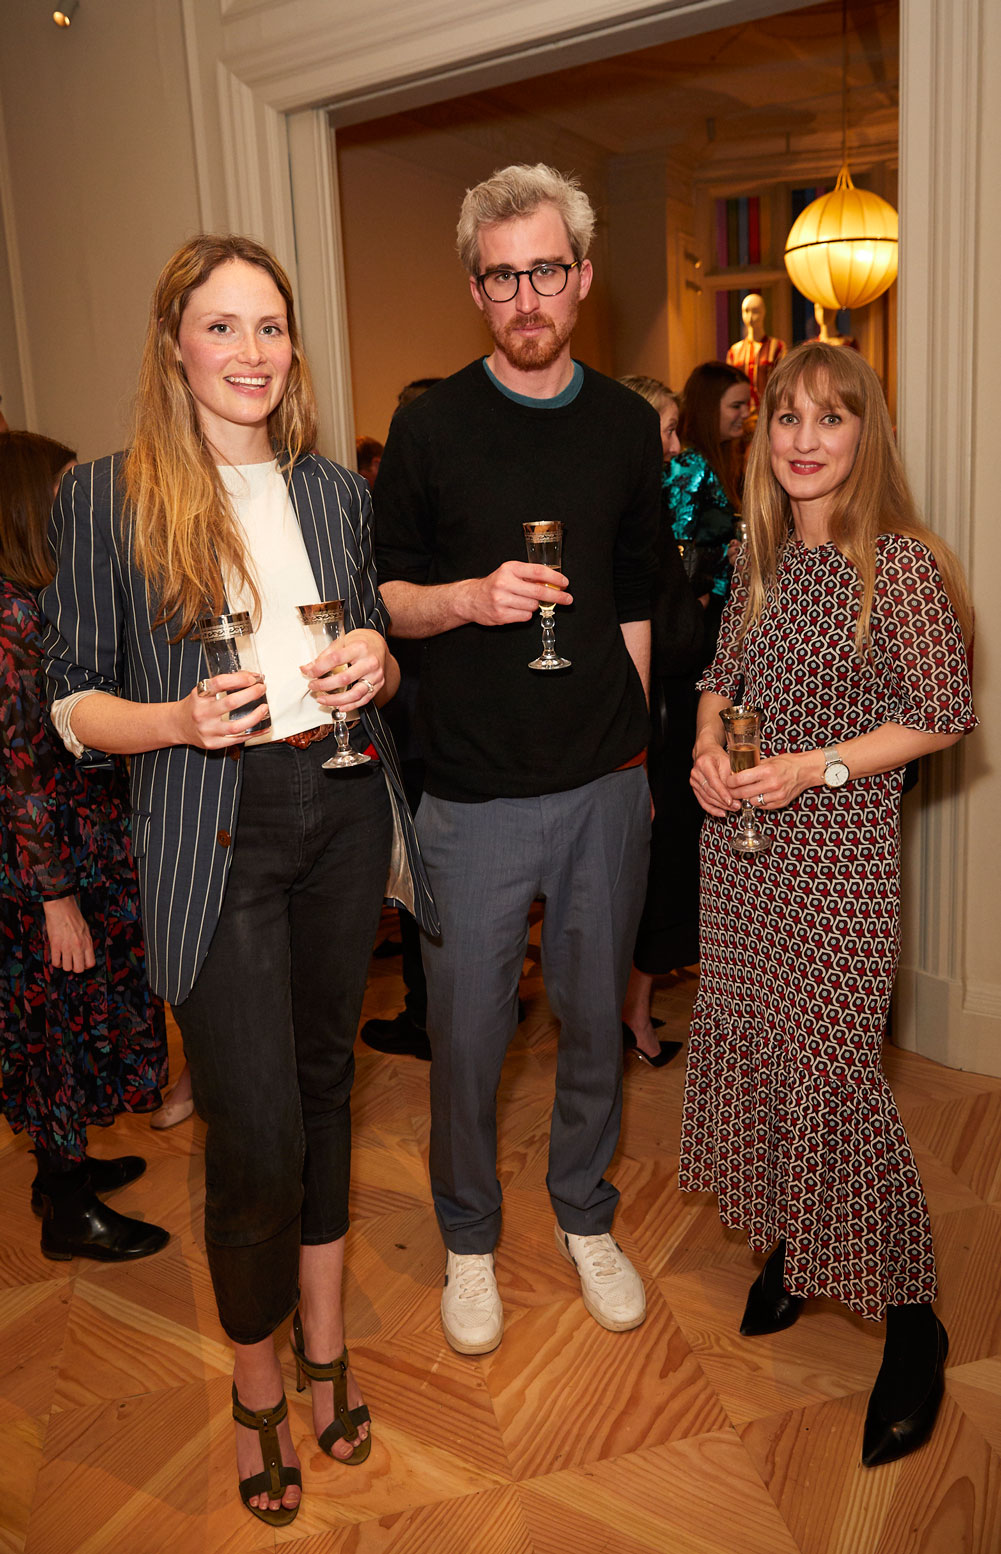 Cath and Jeremy Brown and Jessica Doyle at the Interiors launch at MATCHESFASHION.COM in London